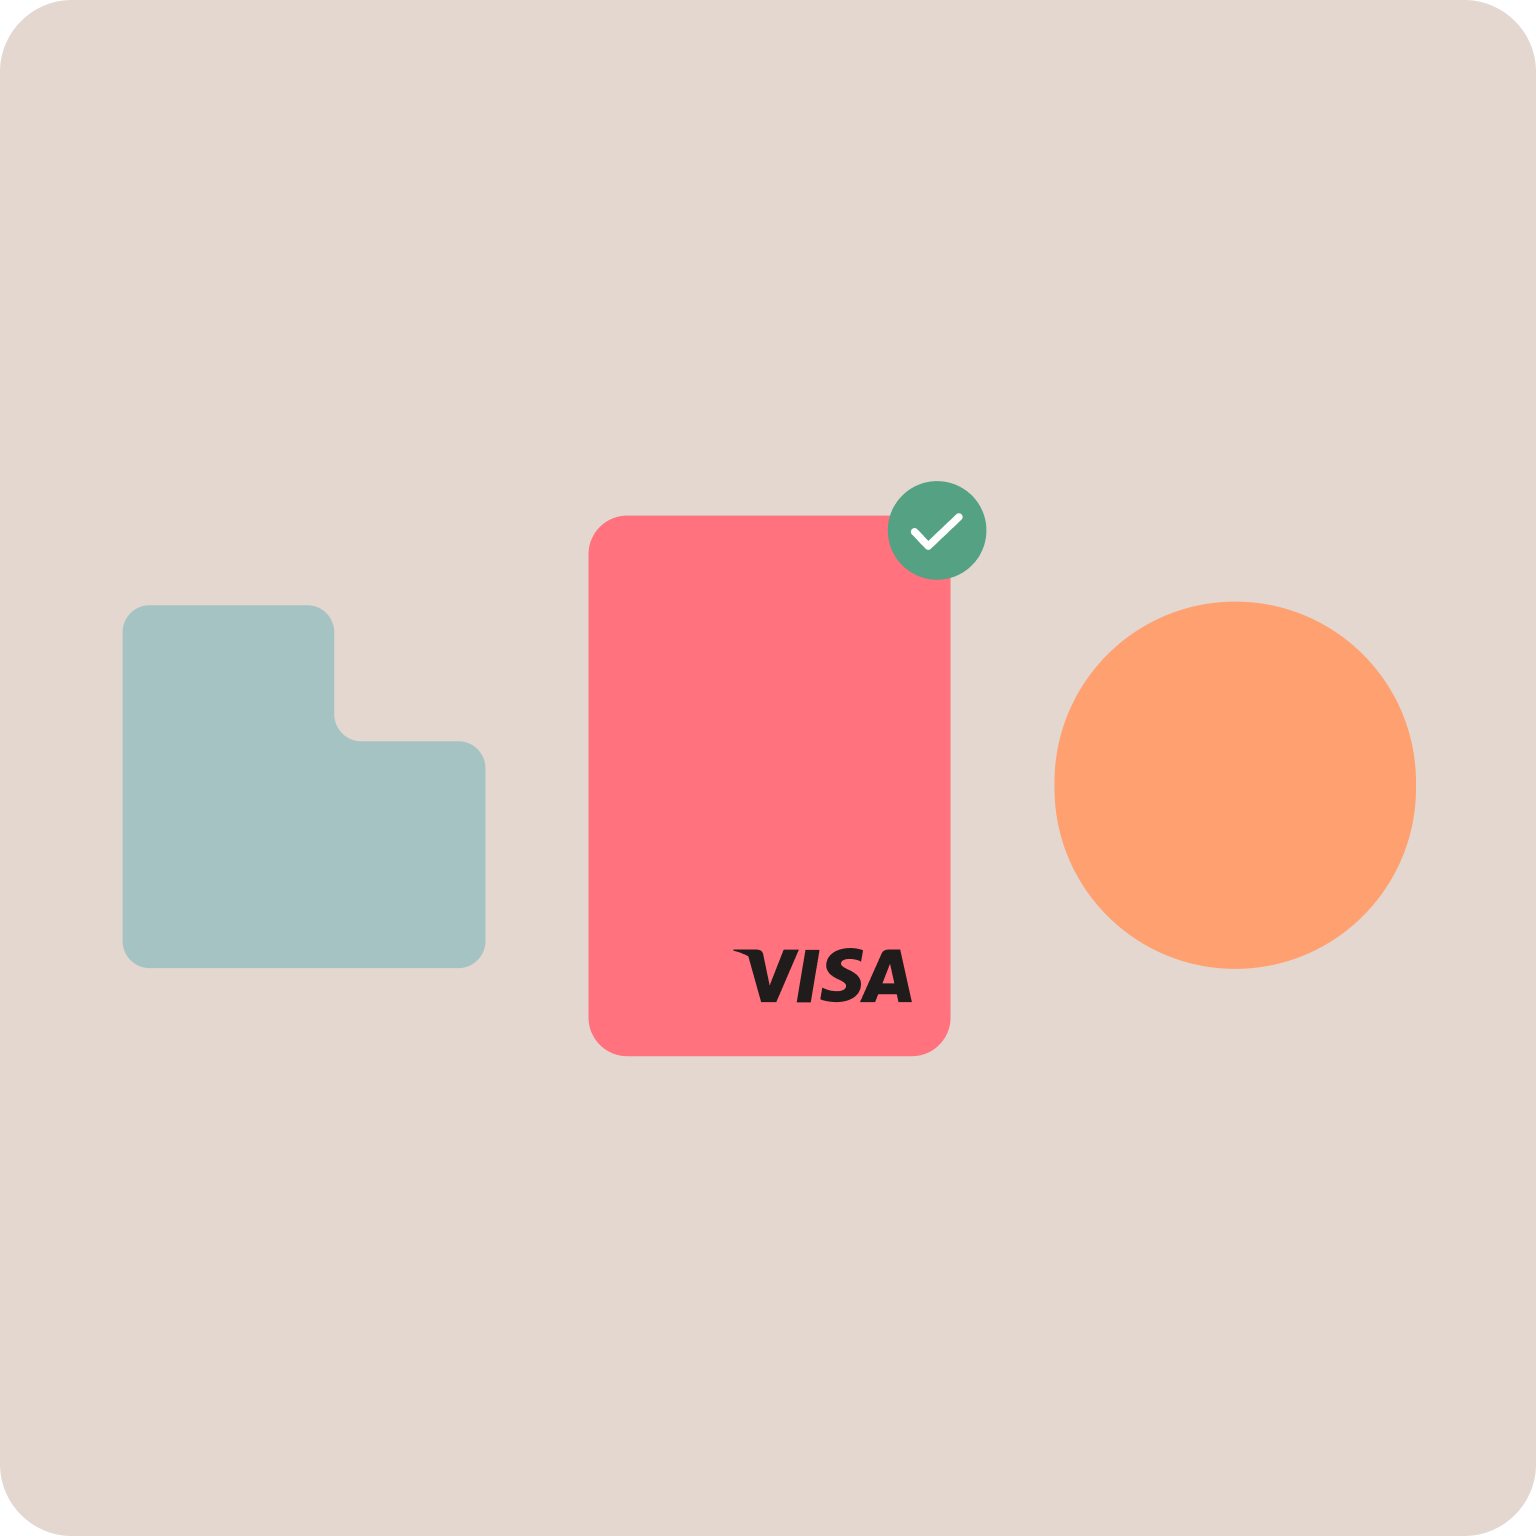 Credit card as a payment method